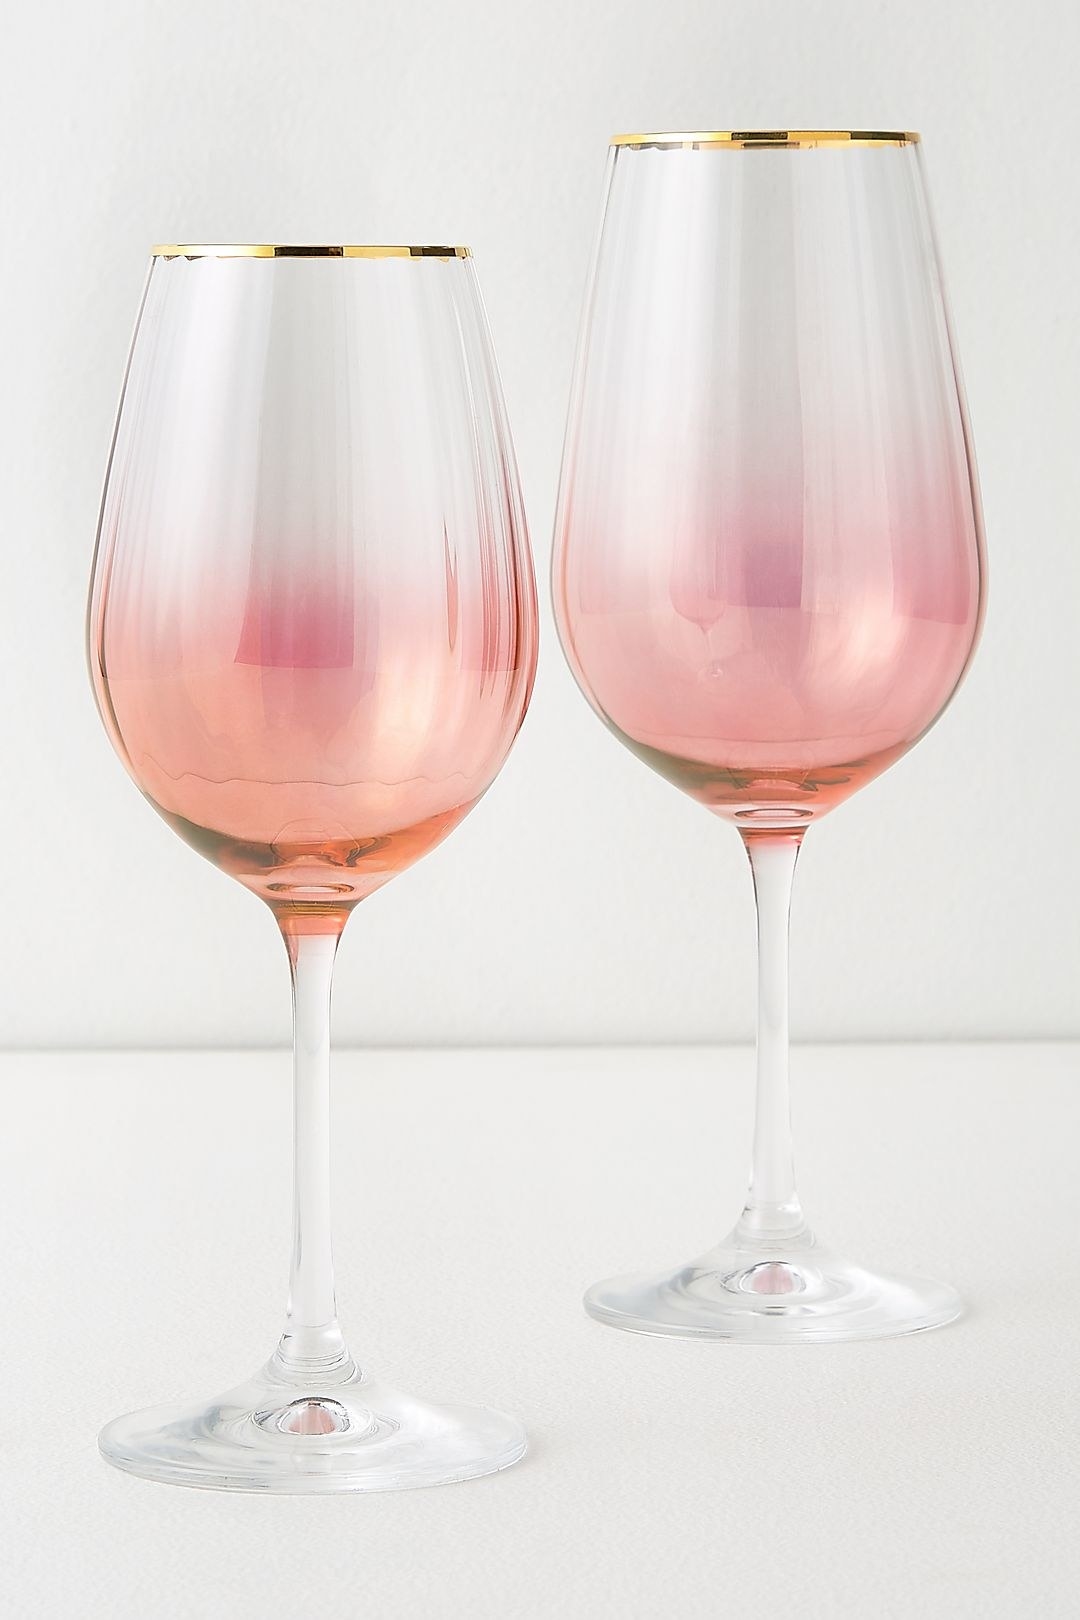 wine glasses with ombre pink in the bottom of the glass